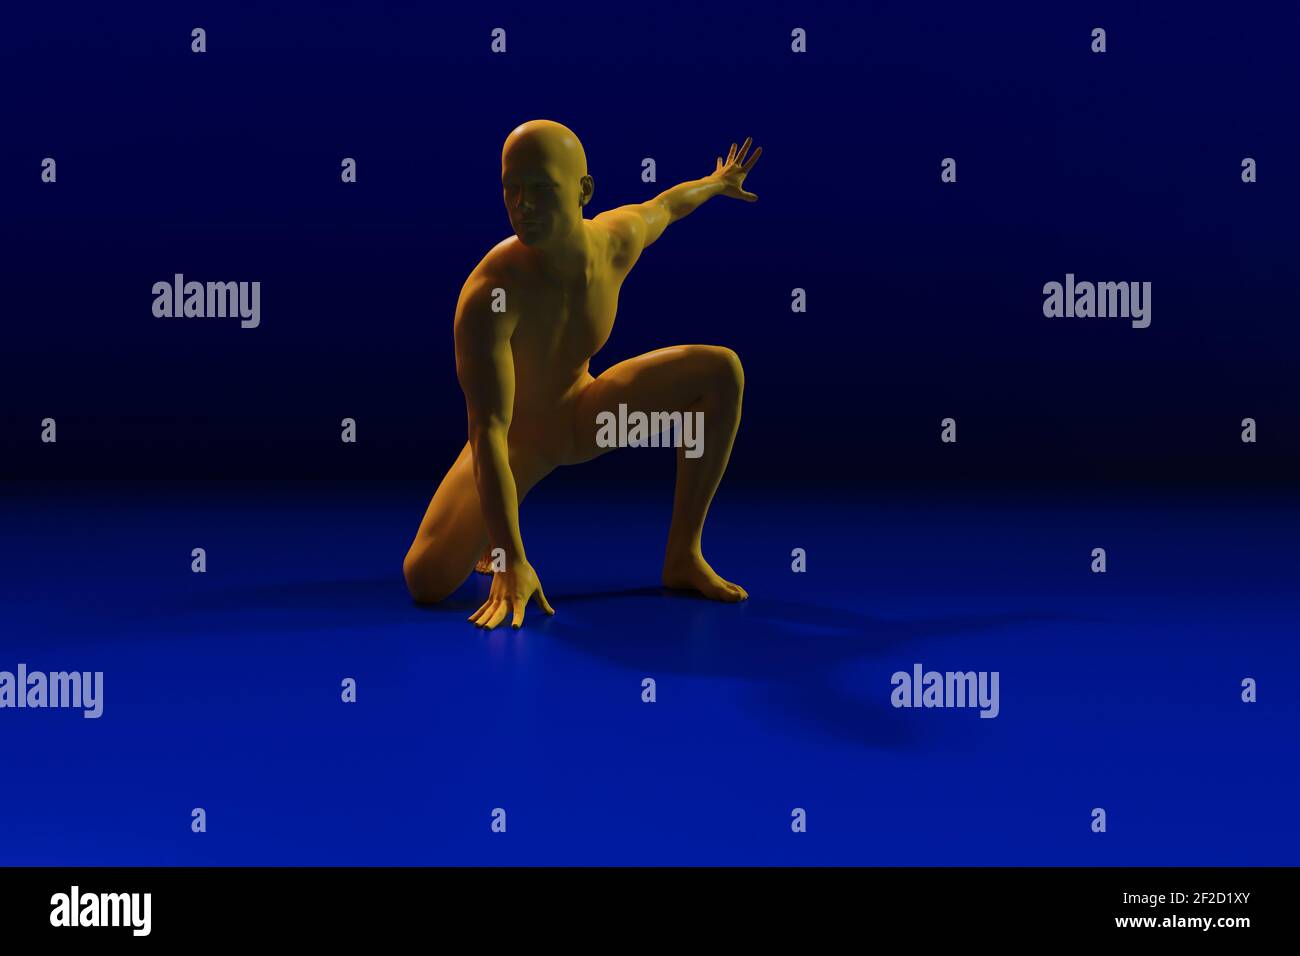 Yellow male figure against blue background CGI figures no MR/PR required Stock Photo